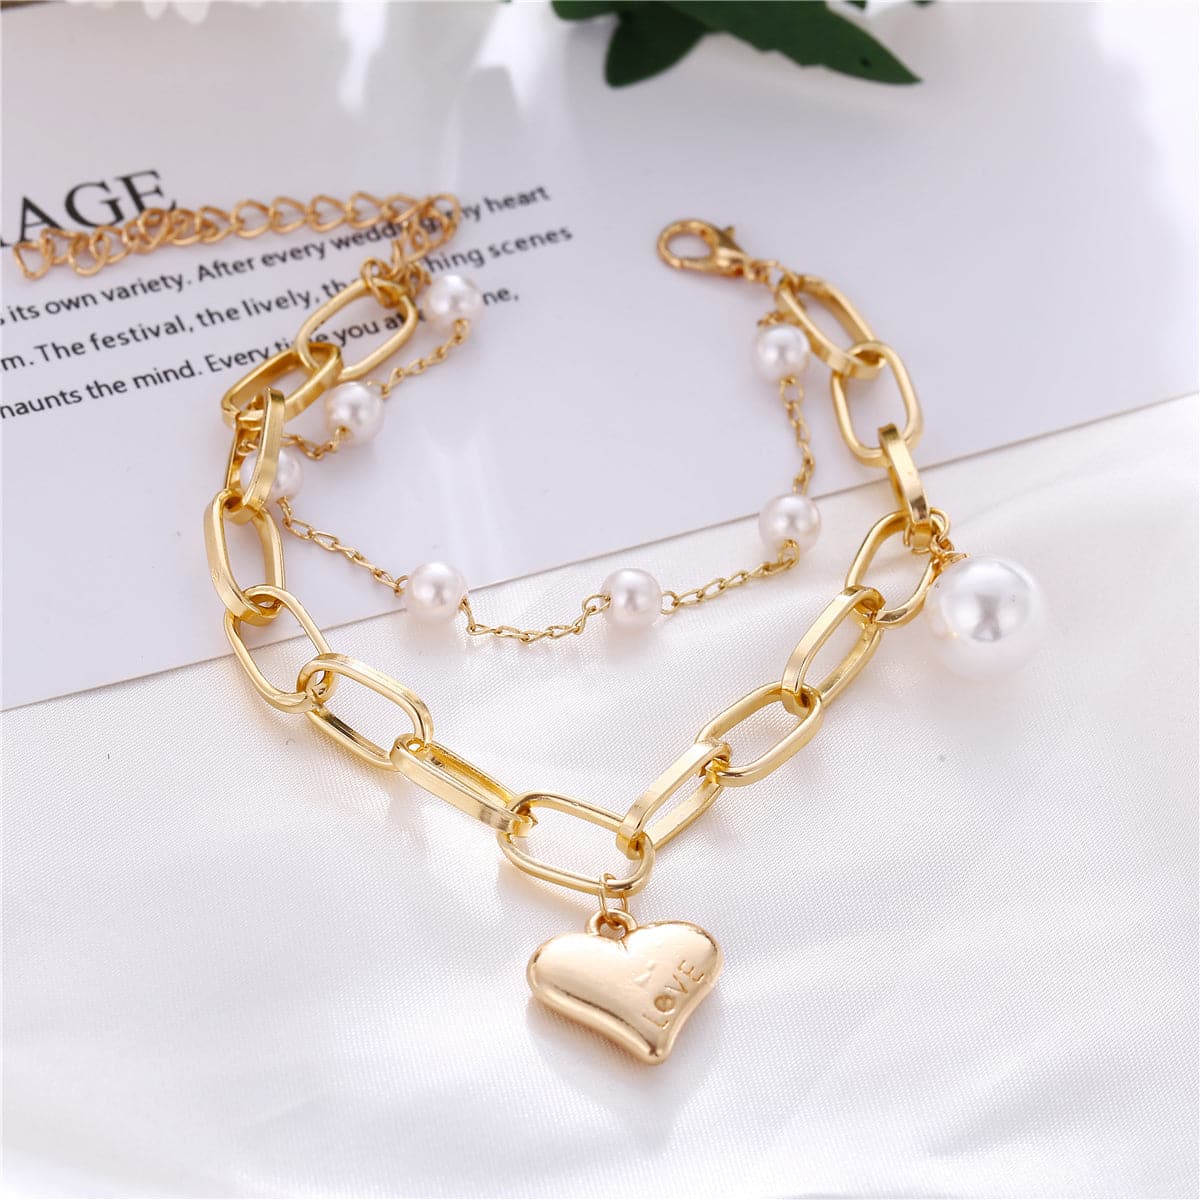 Pearl & 18K Gold-Plated Heart Charm Chain Bracelet